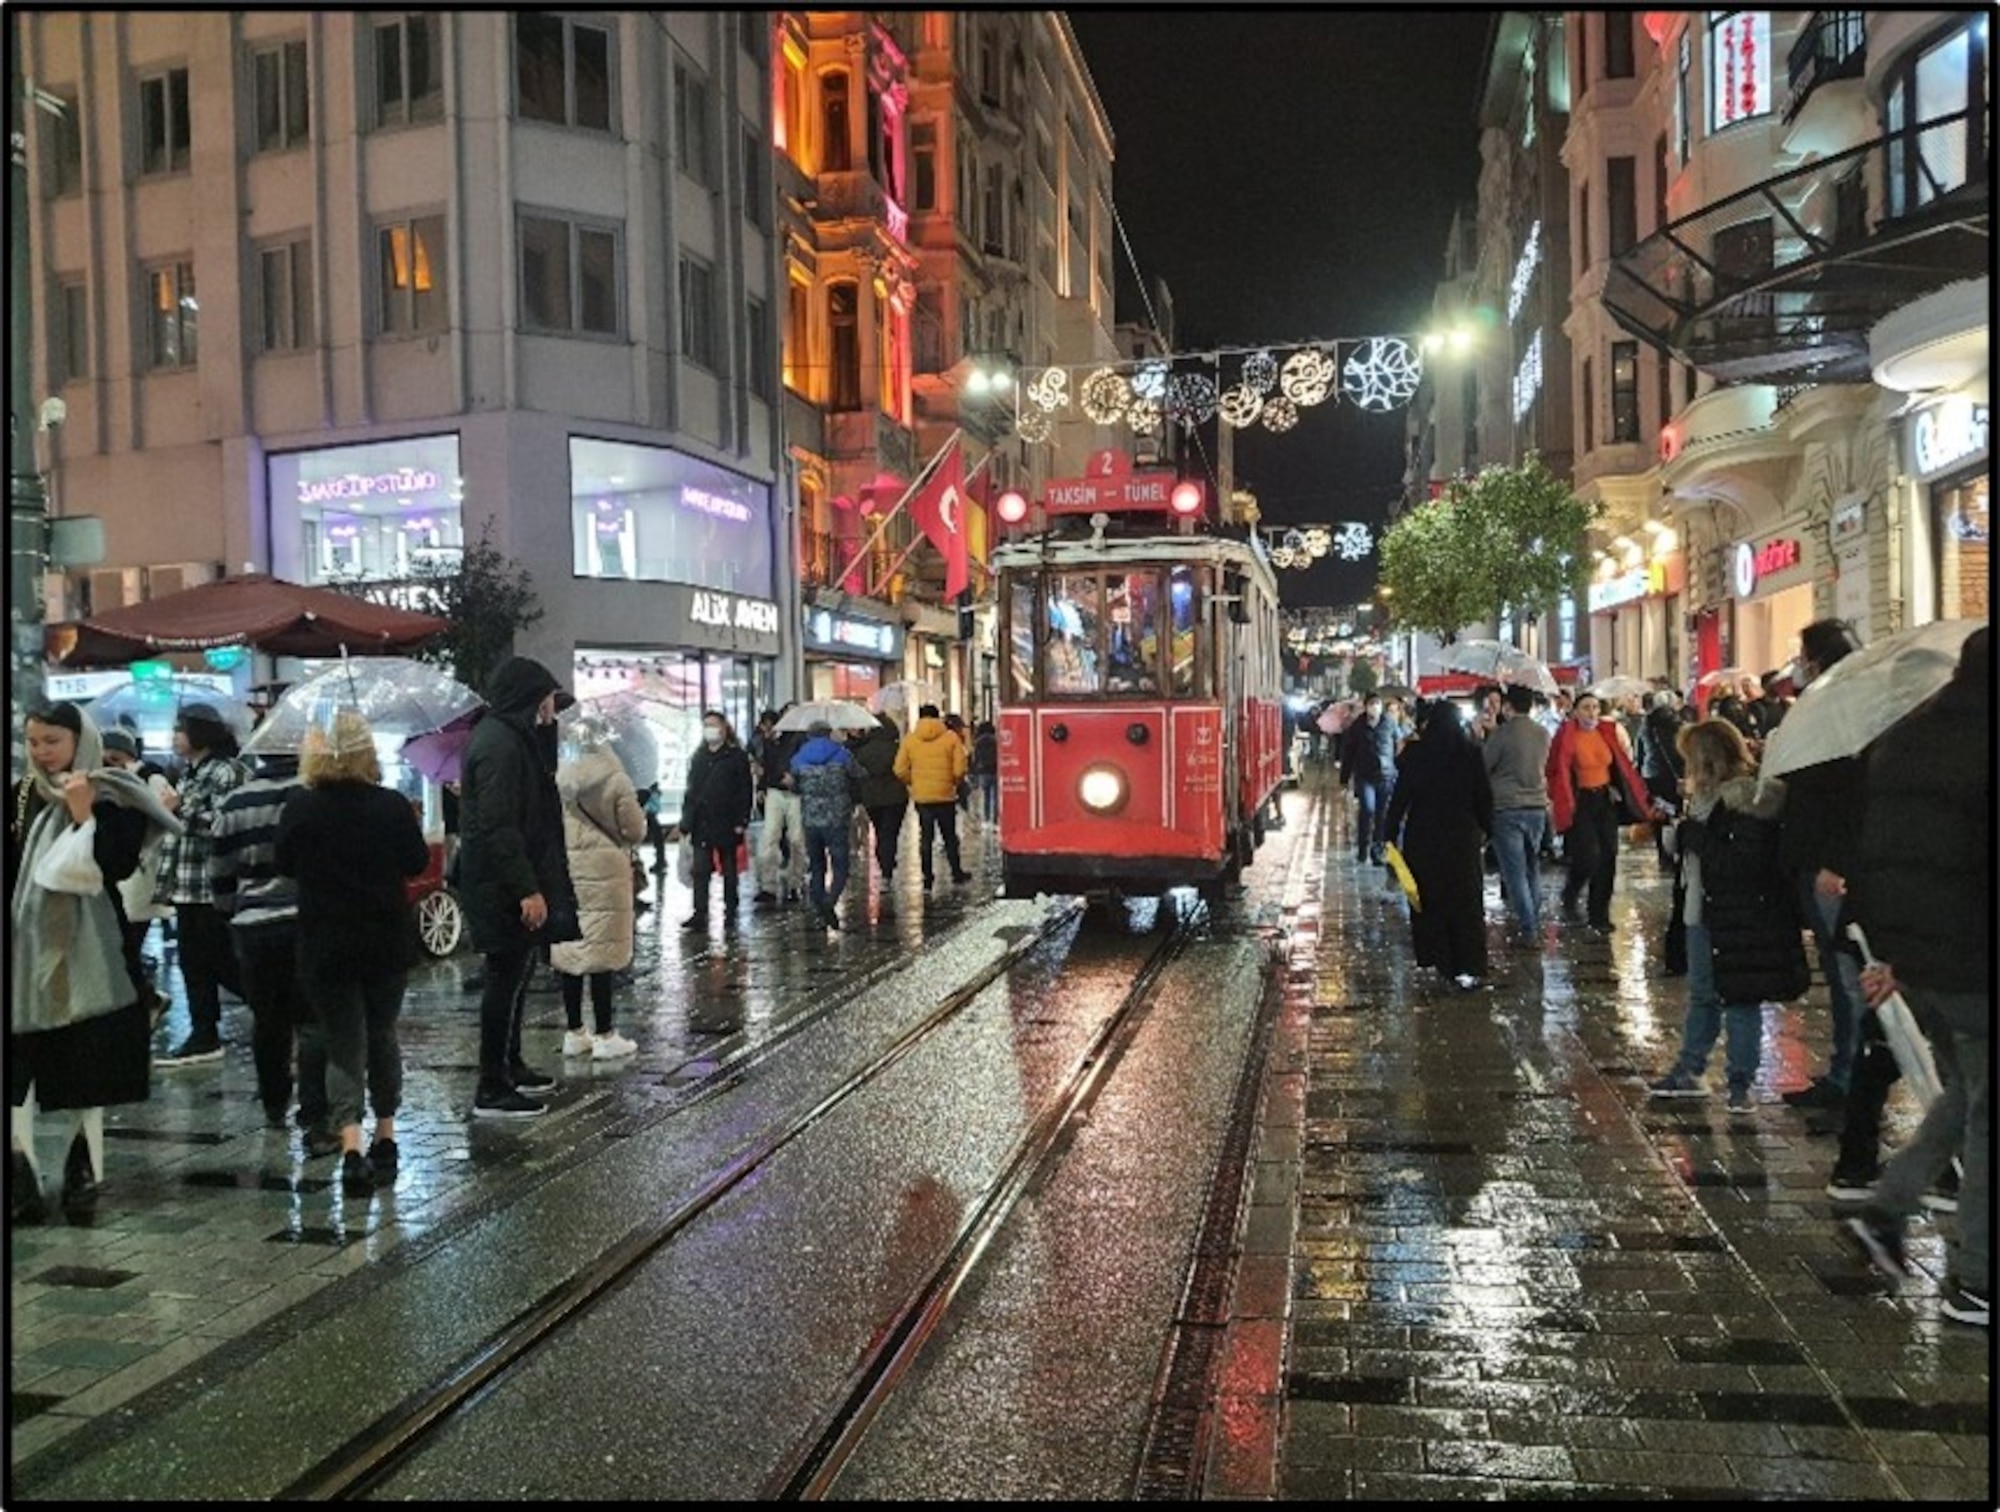 A cable car runs in the middle of the street taking passengers down to the end of İstiklal Street starting from the city center ‘Taksim Square’ in a rainy day in Istanbul Dec. 29, 2021. (U.S. Air Force photo by Tanju Varlıklı)